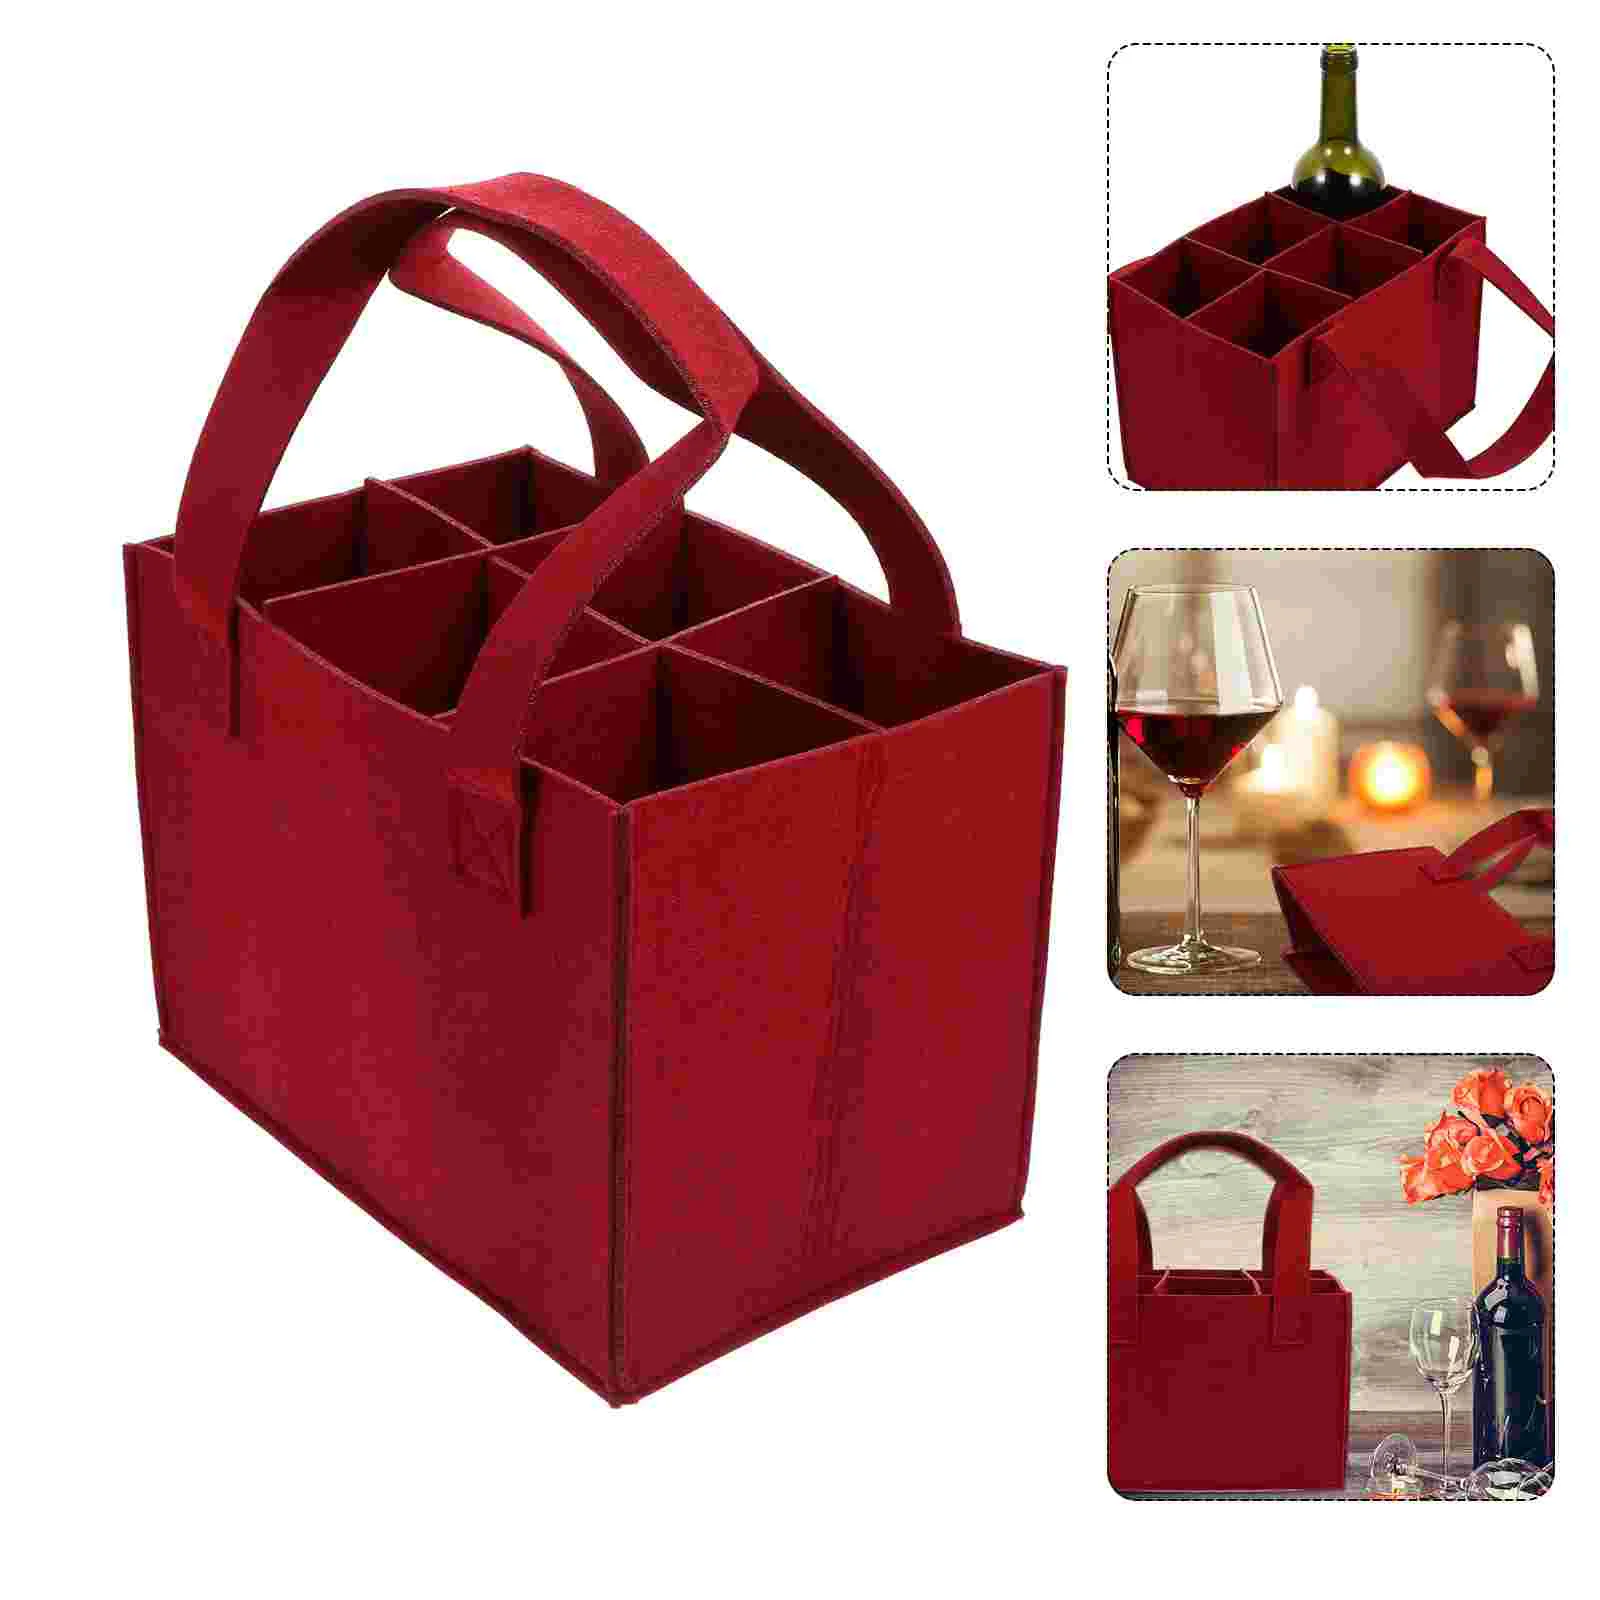 

Storage Bag Purse Storage Bag Bottle Gift Bag Travel Tote Bags Tote Bag Beer Champagne Carrying Bags